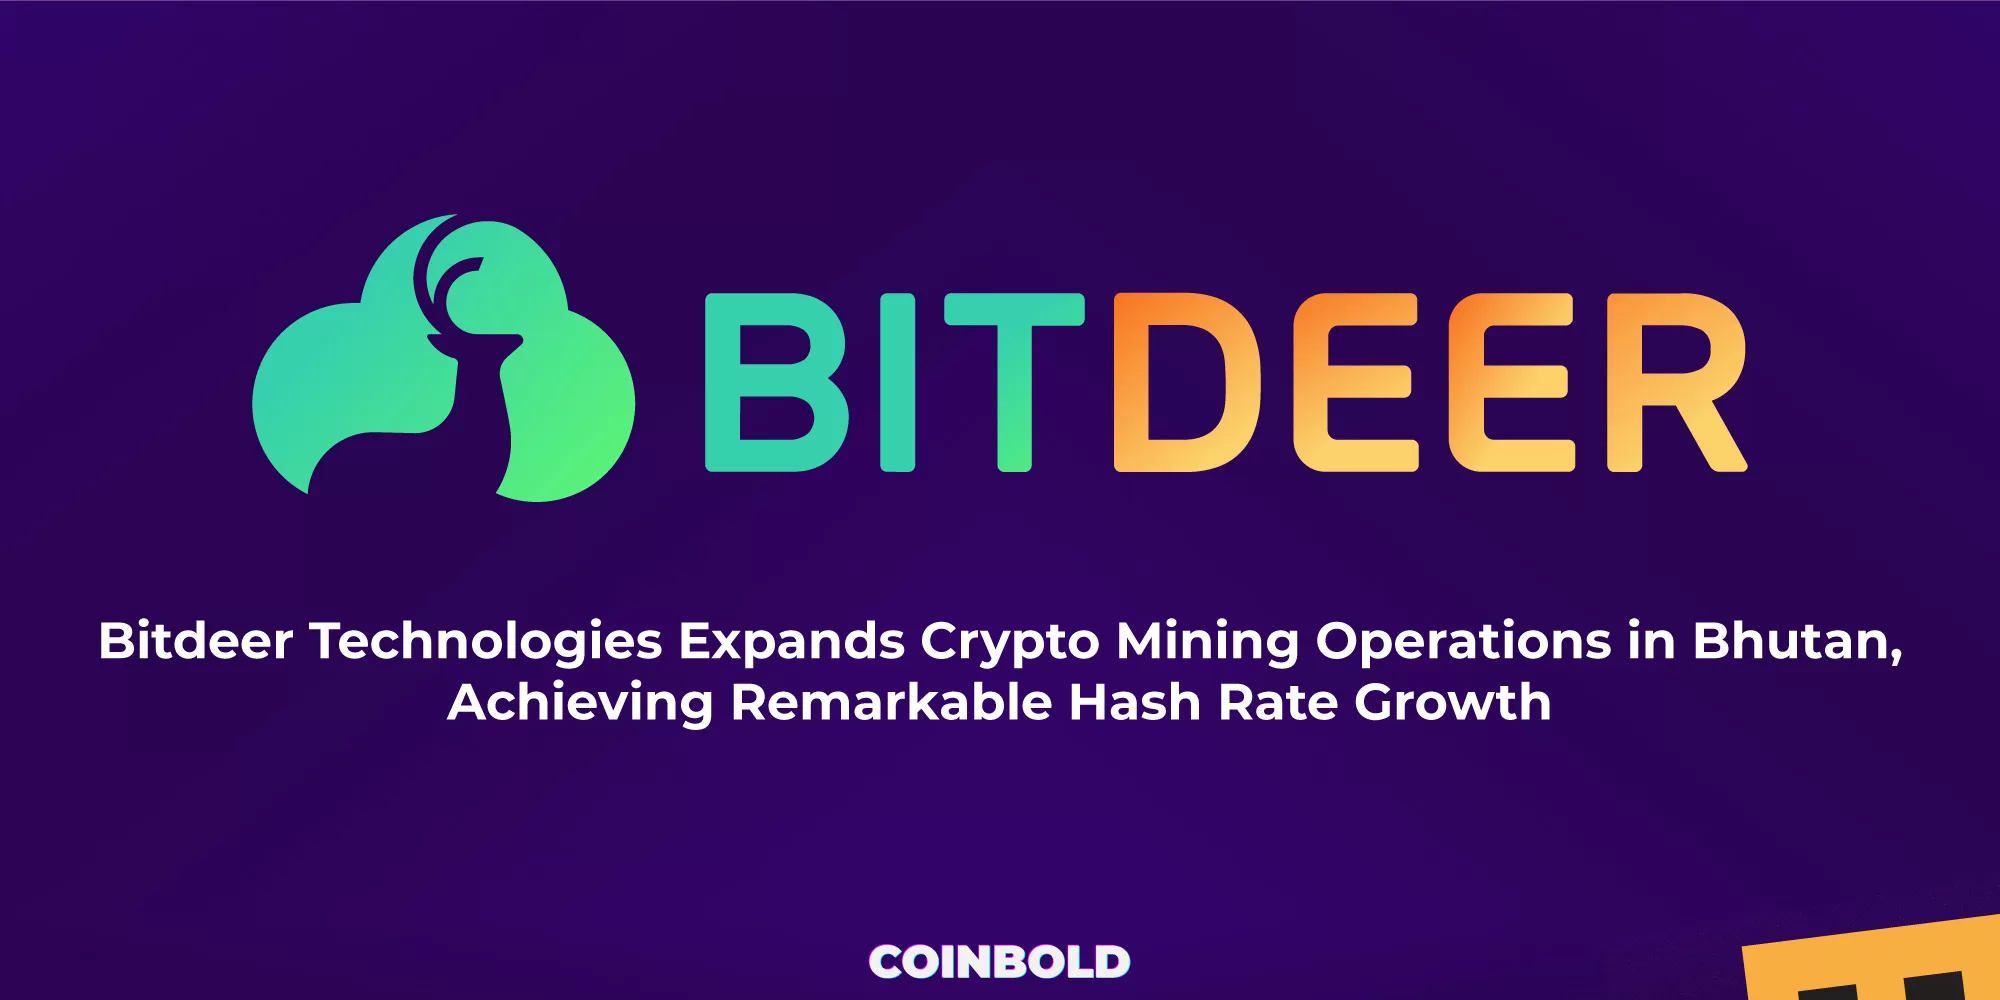 Bitdeer Technologies Expands Crypto Mining Operations in Bhutan, Achieving Remarkable Hash Rate Growth